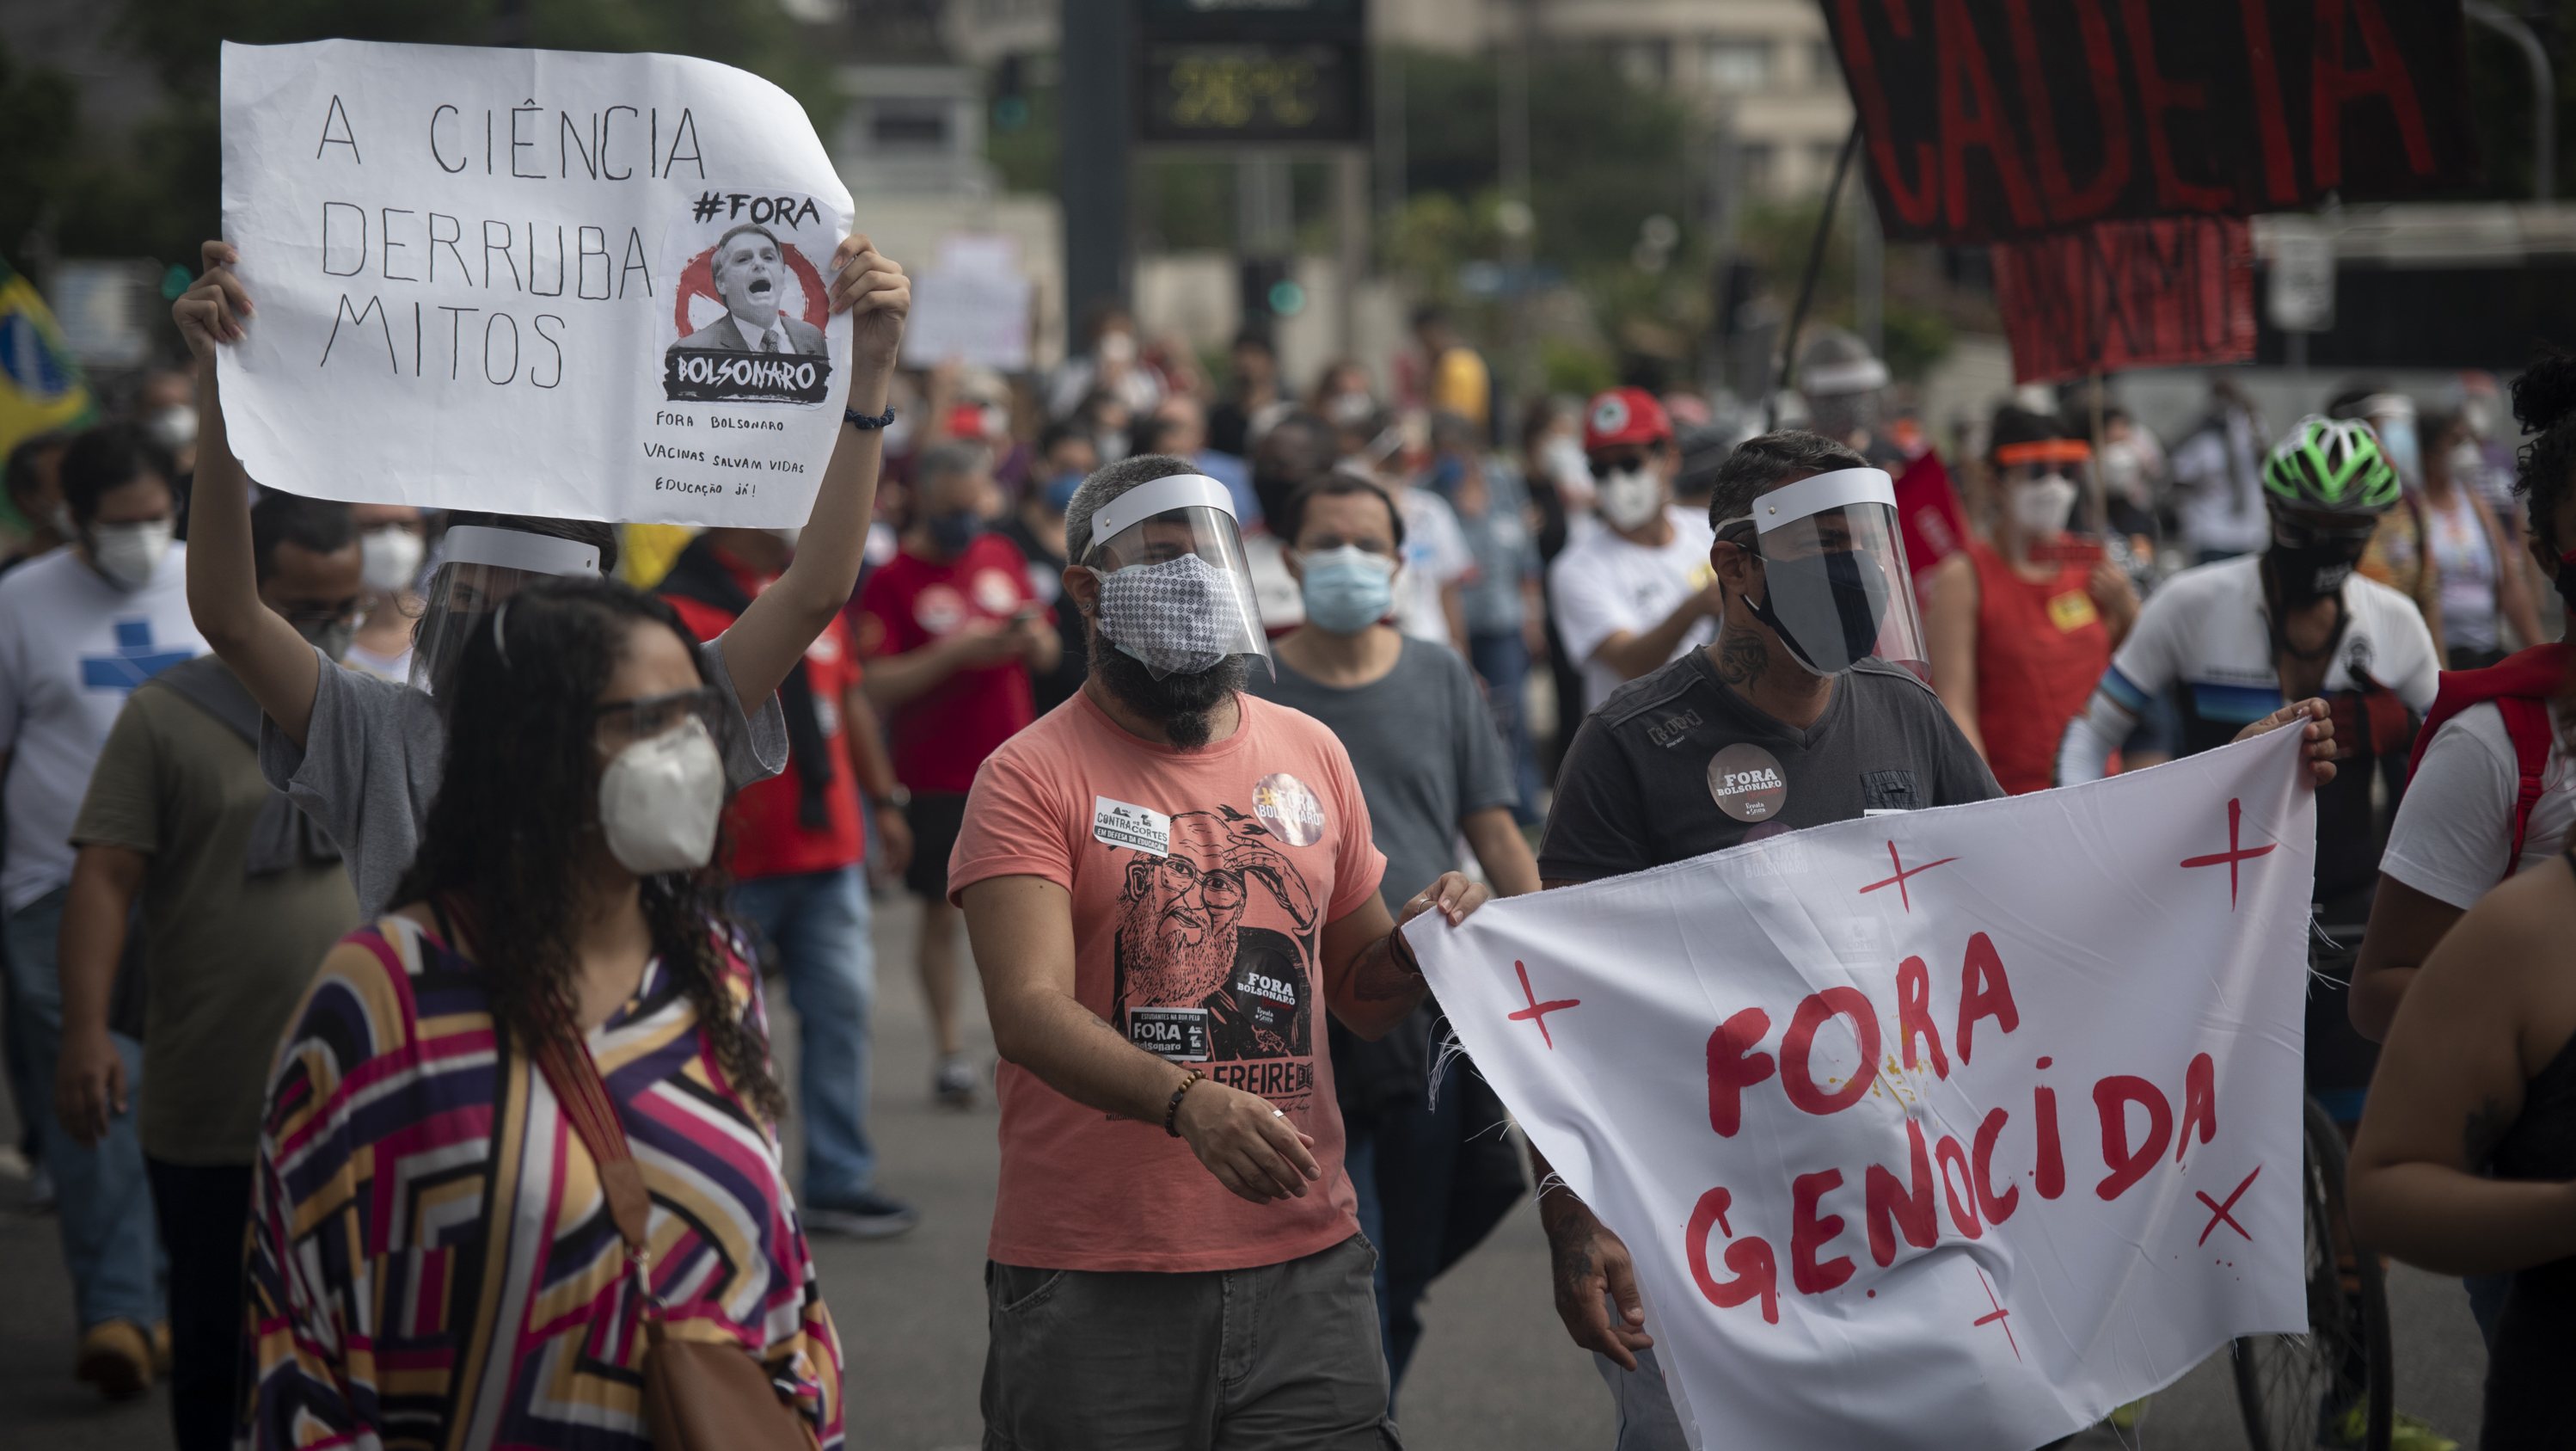 Brazil hits 500,000 COVID-19 deaths amid nationwide protests